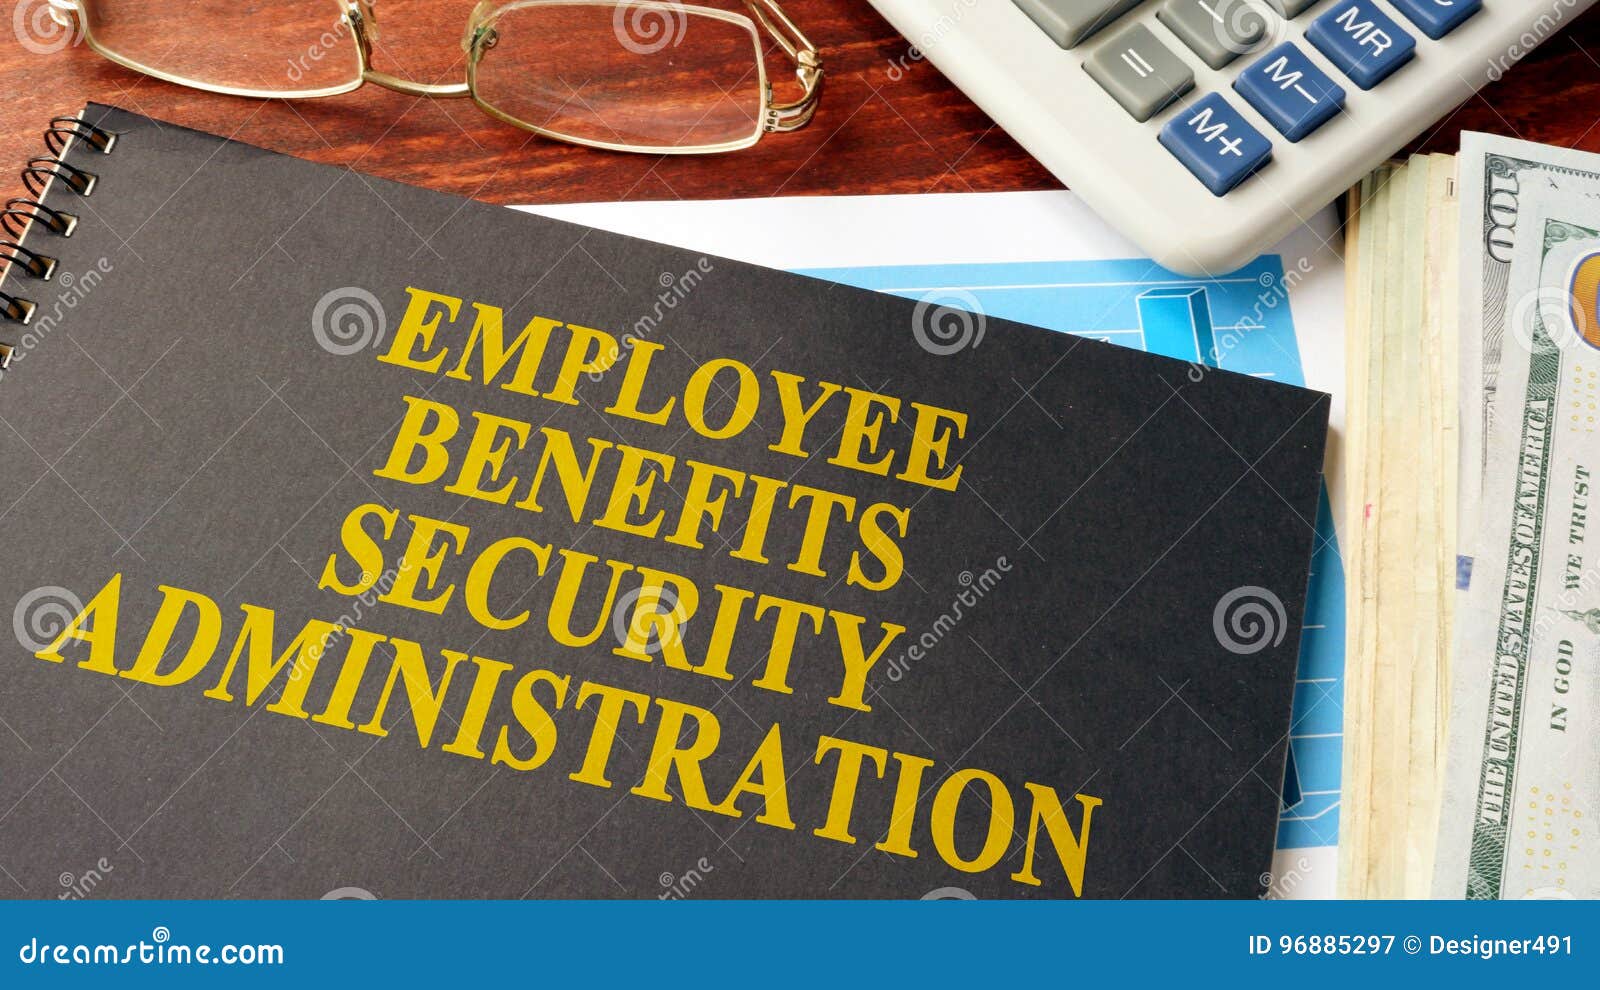 employee benefits security administration ebsa.